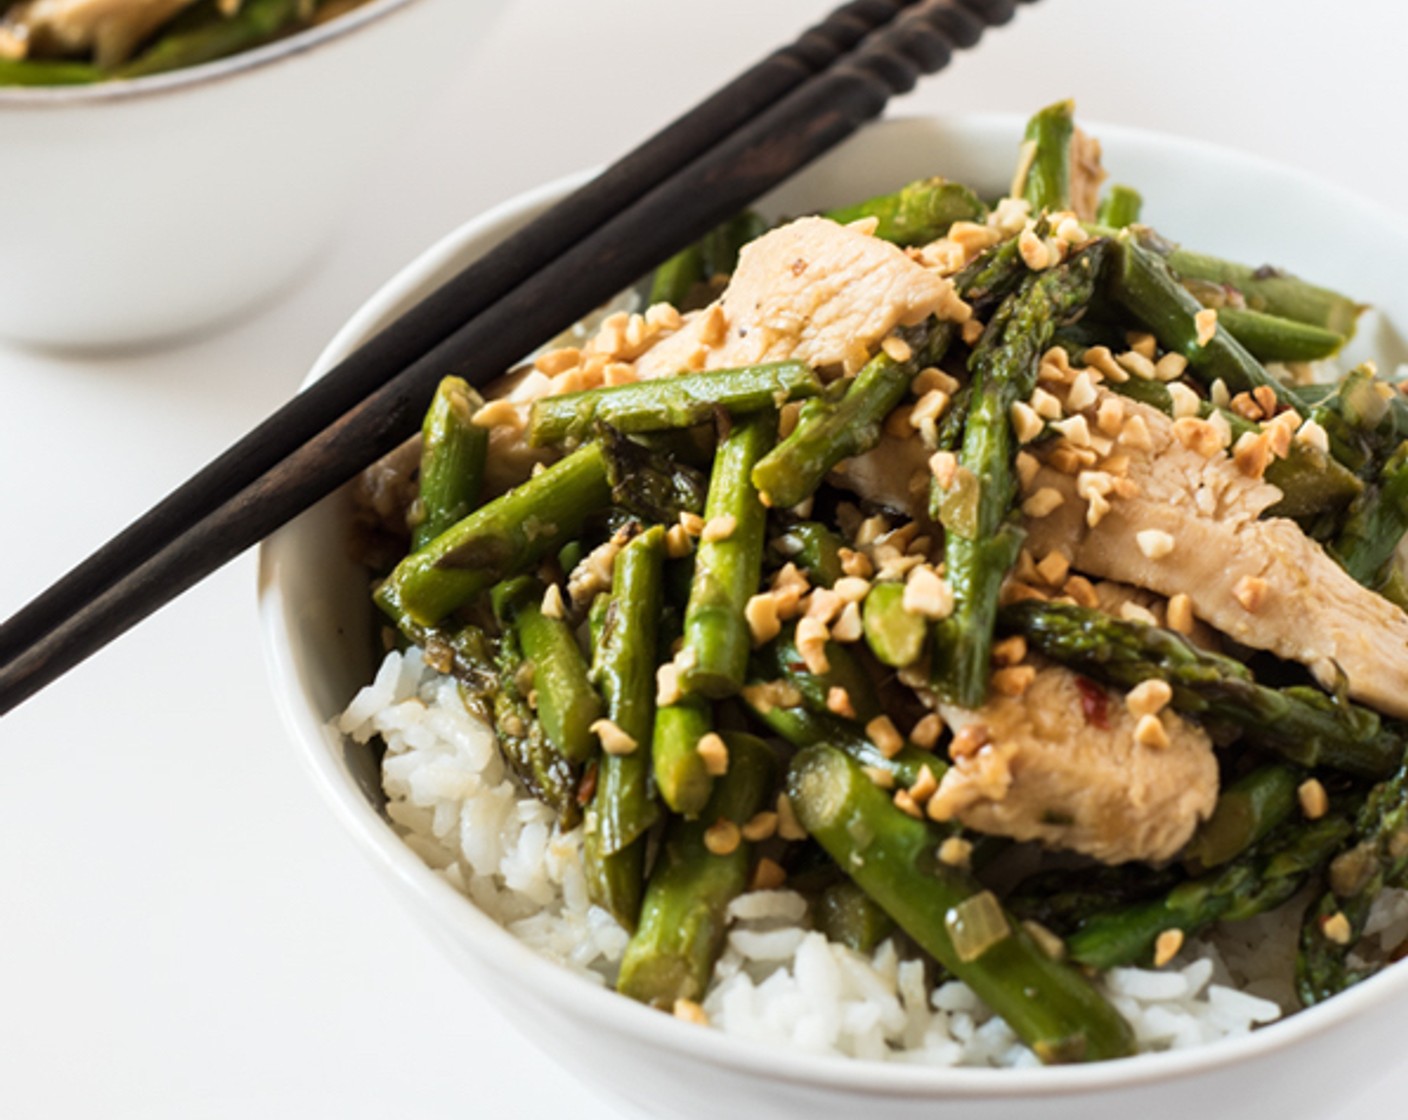 step 7 Spoon the lemongrass chicken and asparagus over the rice and sprinkle some Cashew Nuts (1/4 cup) if desired.